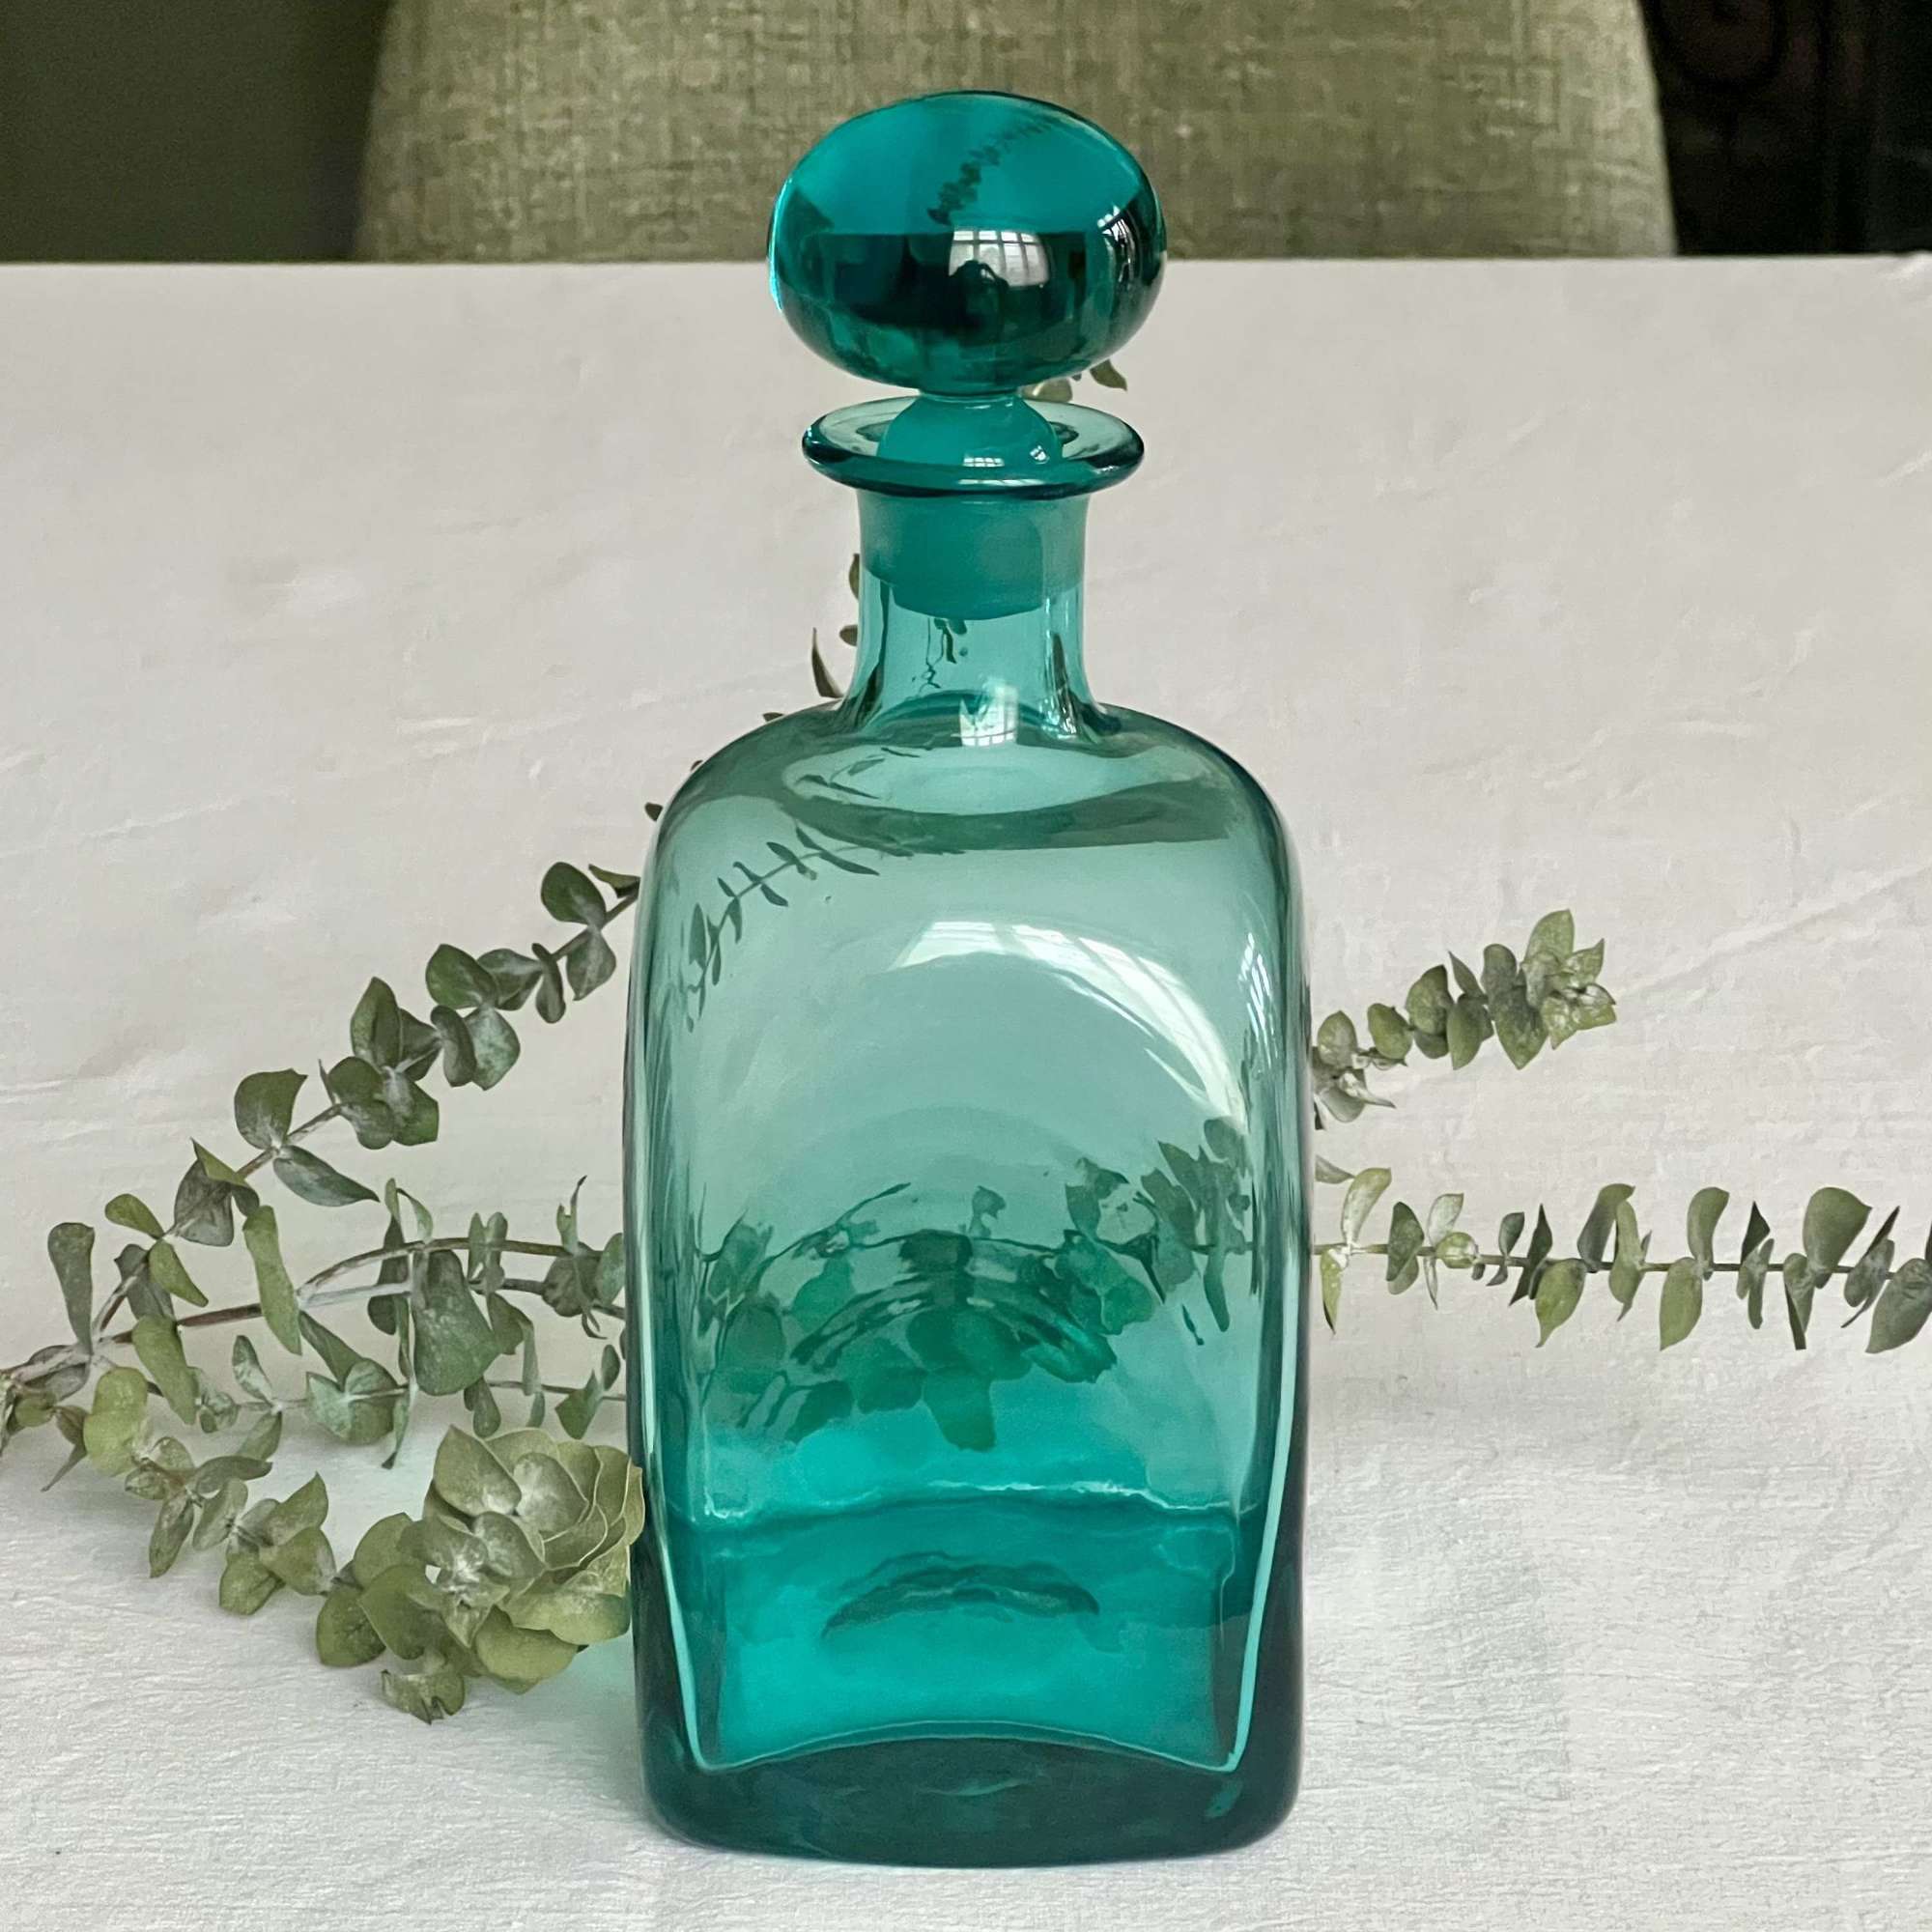 Turquoise Glass Decanter By Frank Thrower For Dartington 1967